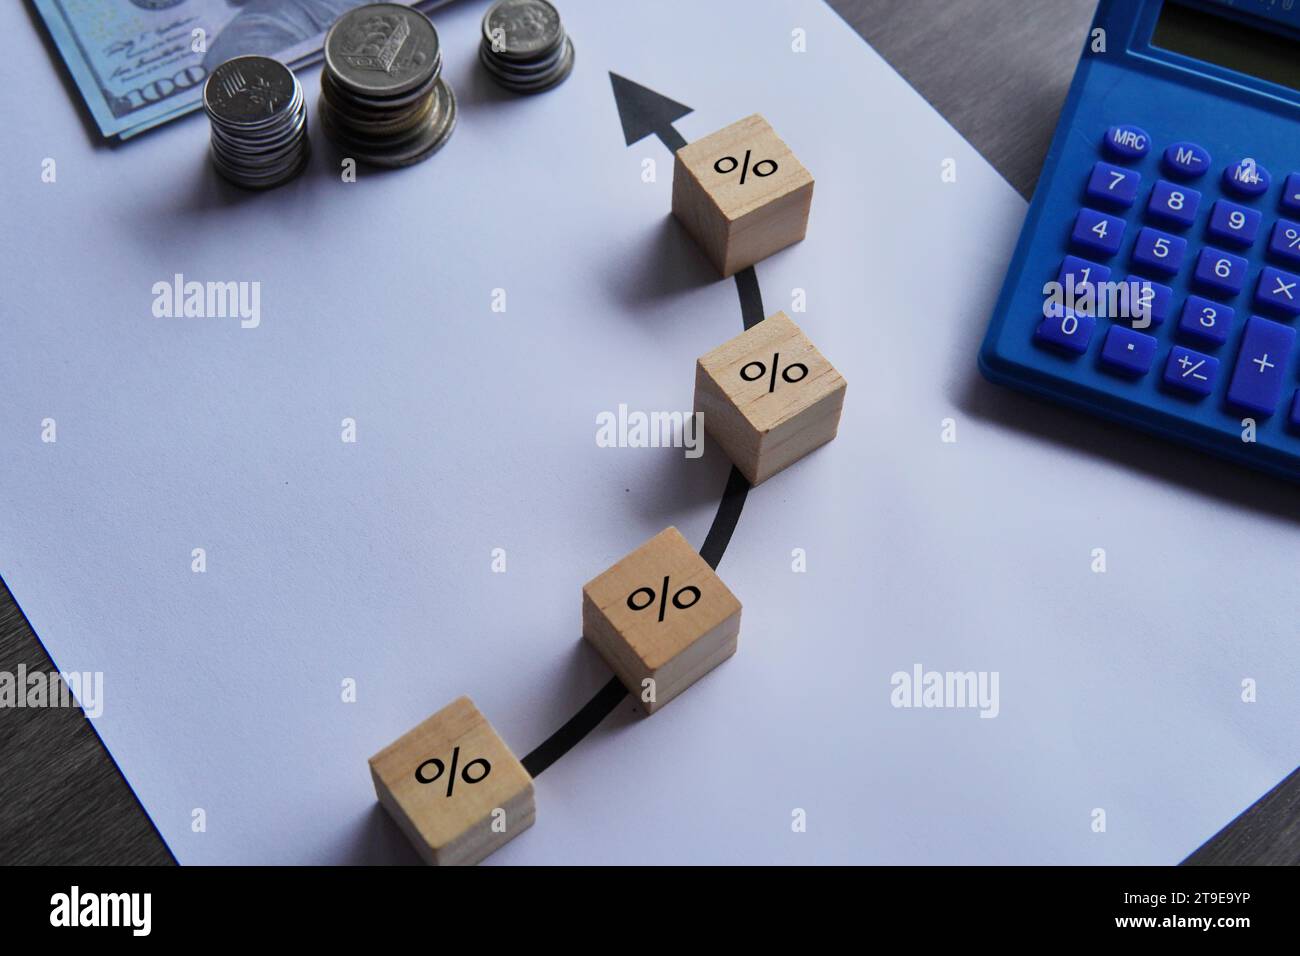 Top view image of money, calculator and increase percentage icon. Finance, interest rate concept. Stock Photo